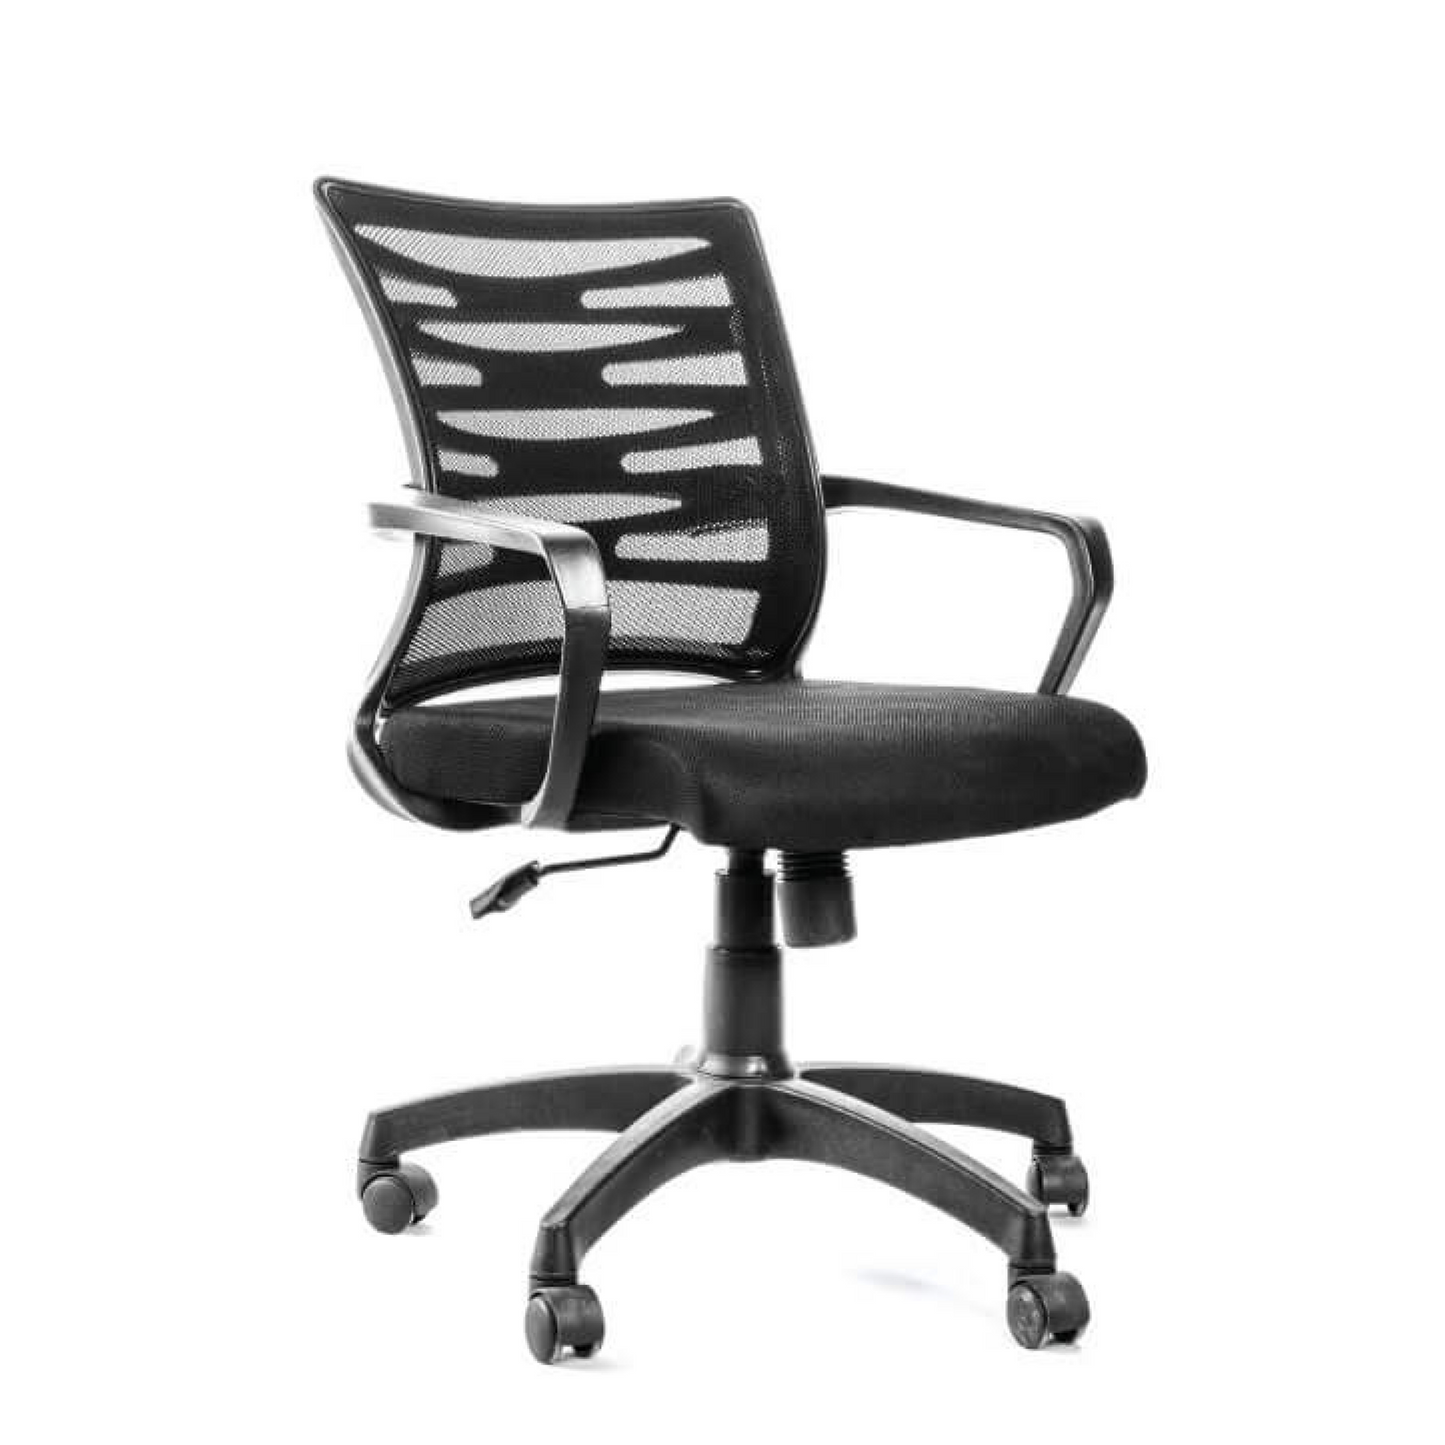 Best Office Chair - Model No. KP-HOWLER ECO